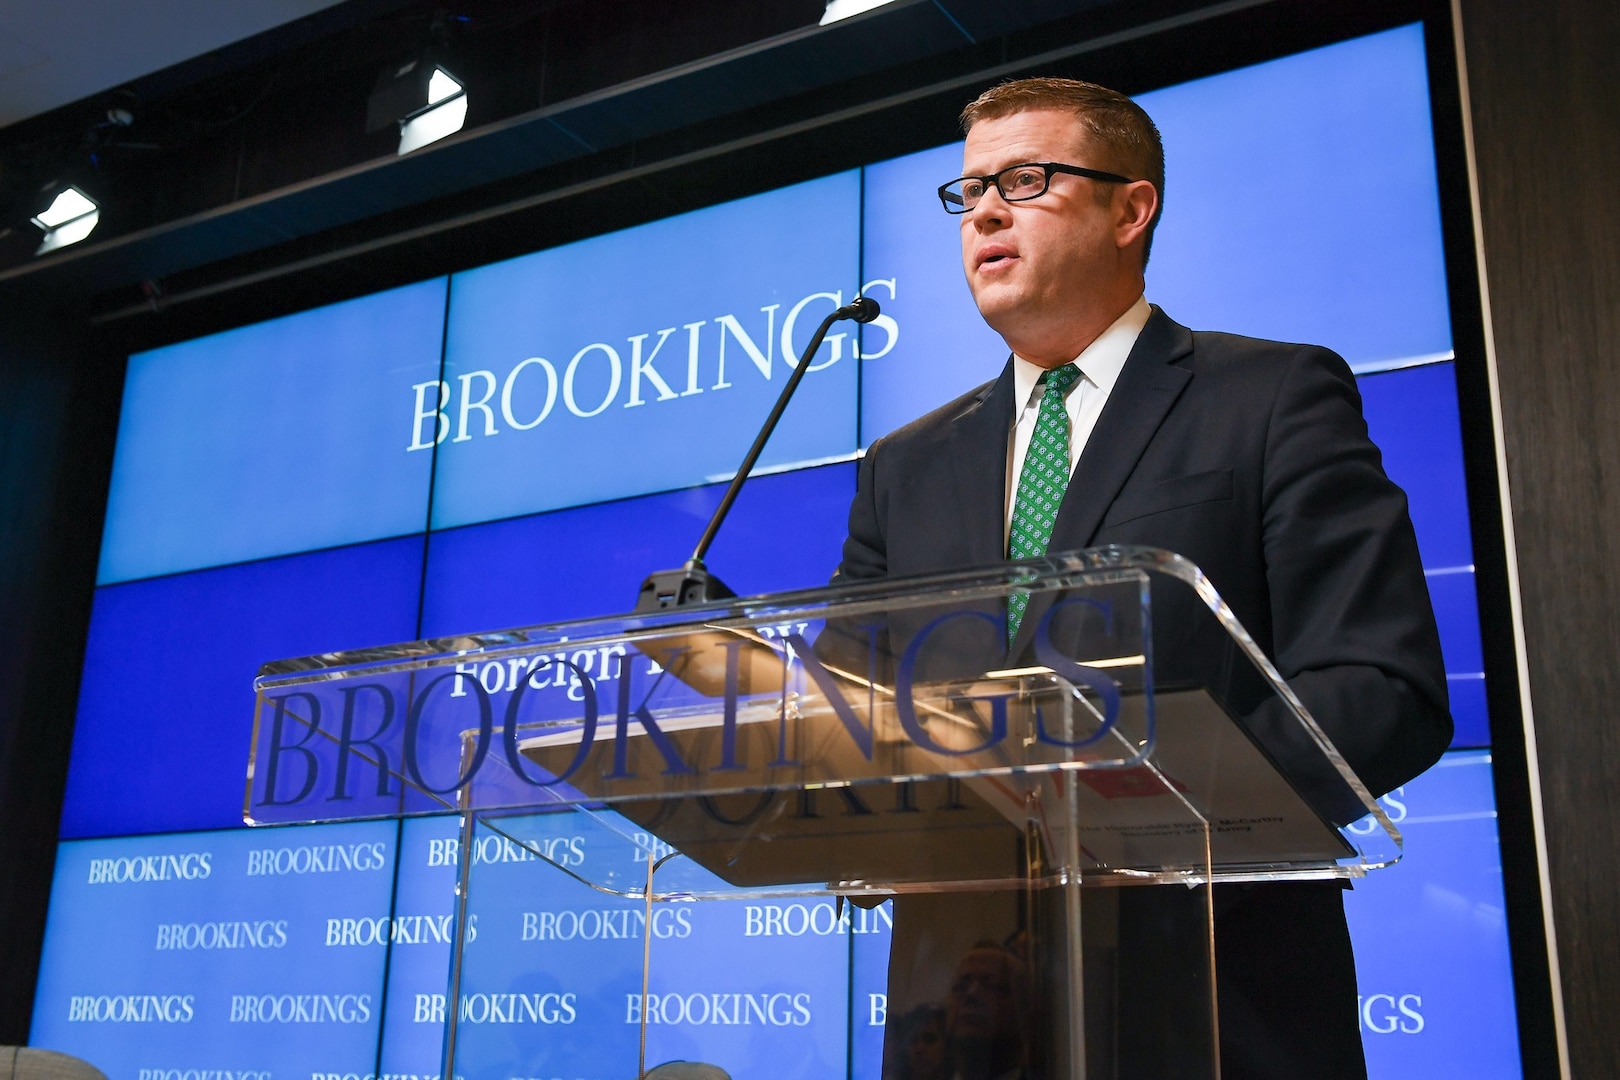 Secretary of the Army Ryan McCarthy speaks with Michael O'Hanlon, senior fellow in the foreign policy program at the Brookings Institution, during a speaking engagement in Washington, D.C., Jan. 10.